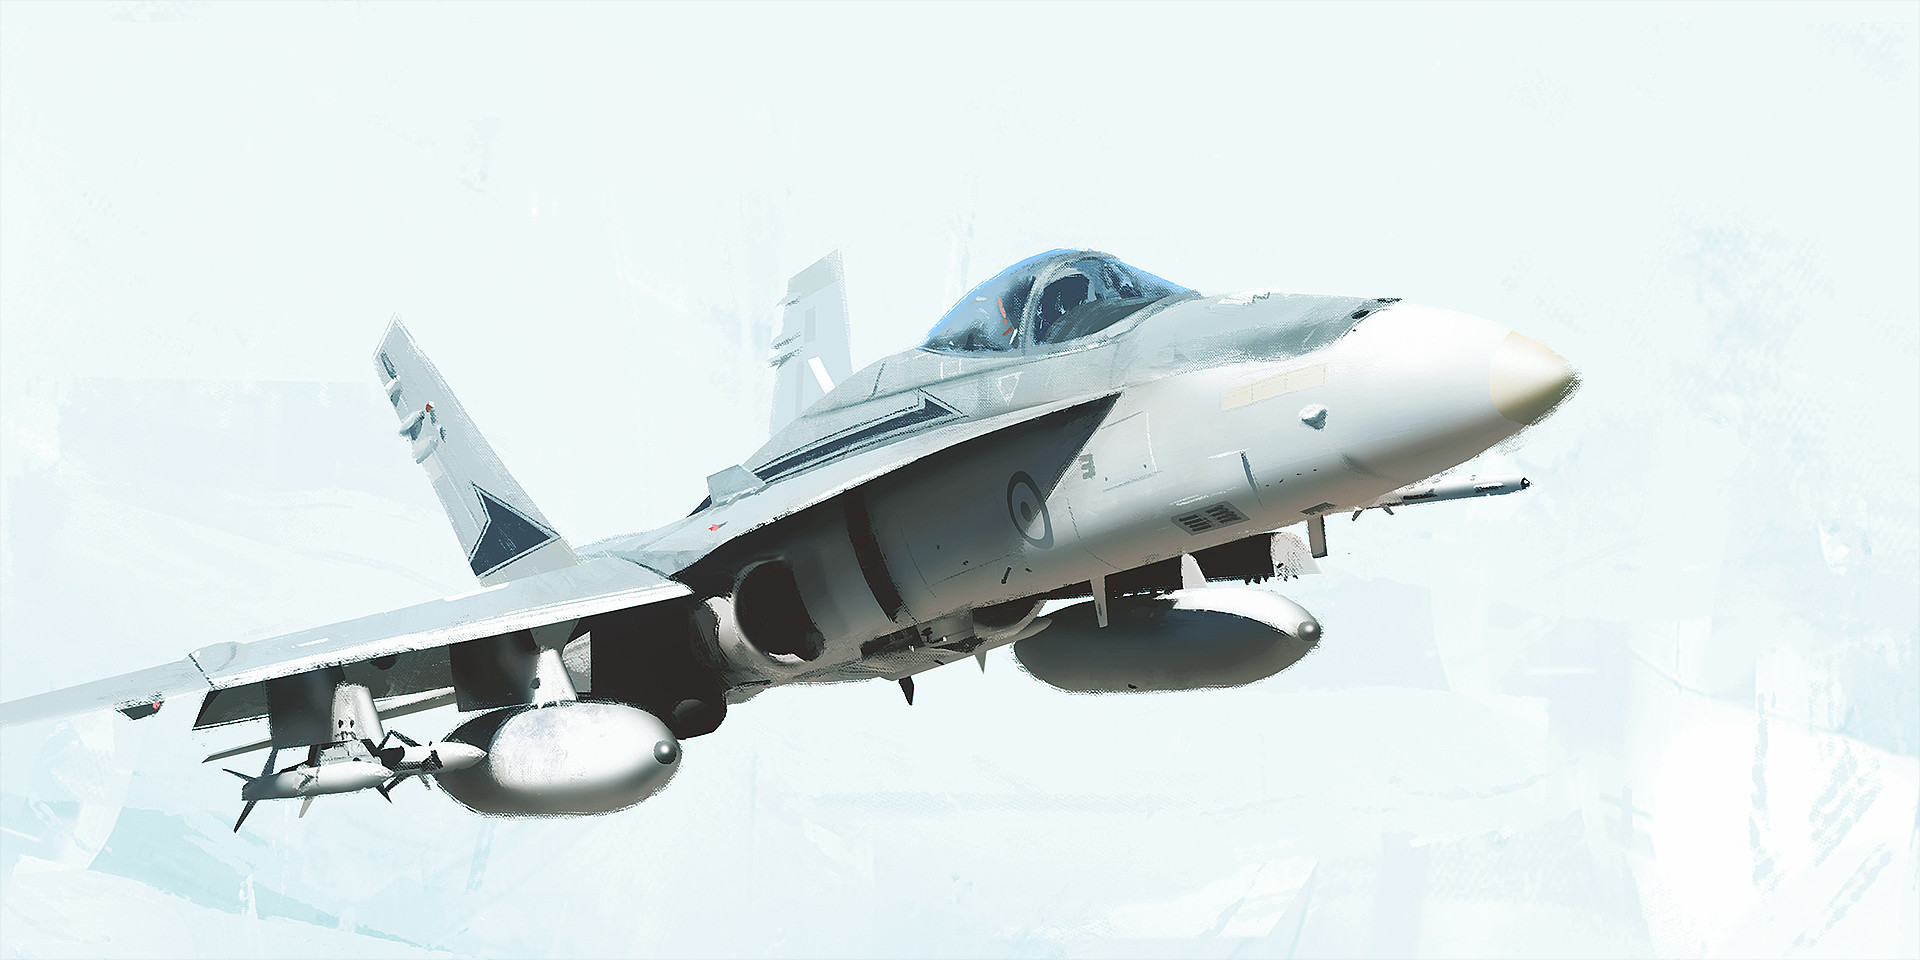 General 1920x960 vehicle white background concept art Joe Gloria aircraft military aircraft McDonnell Douglas F/A-18 Hornet American aircraft military military vehicle flying pilot simple background jet fighter minimalism McDonnell Douglas